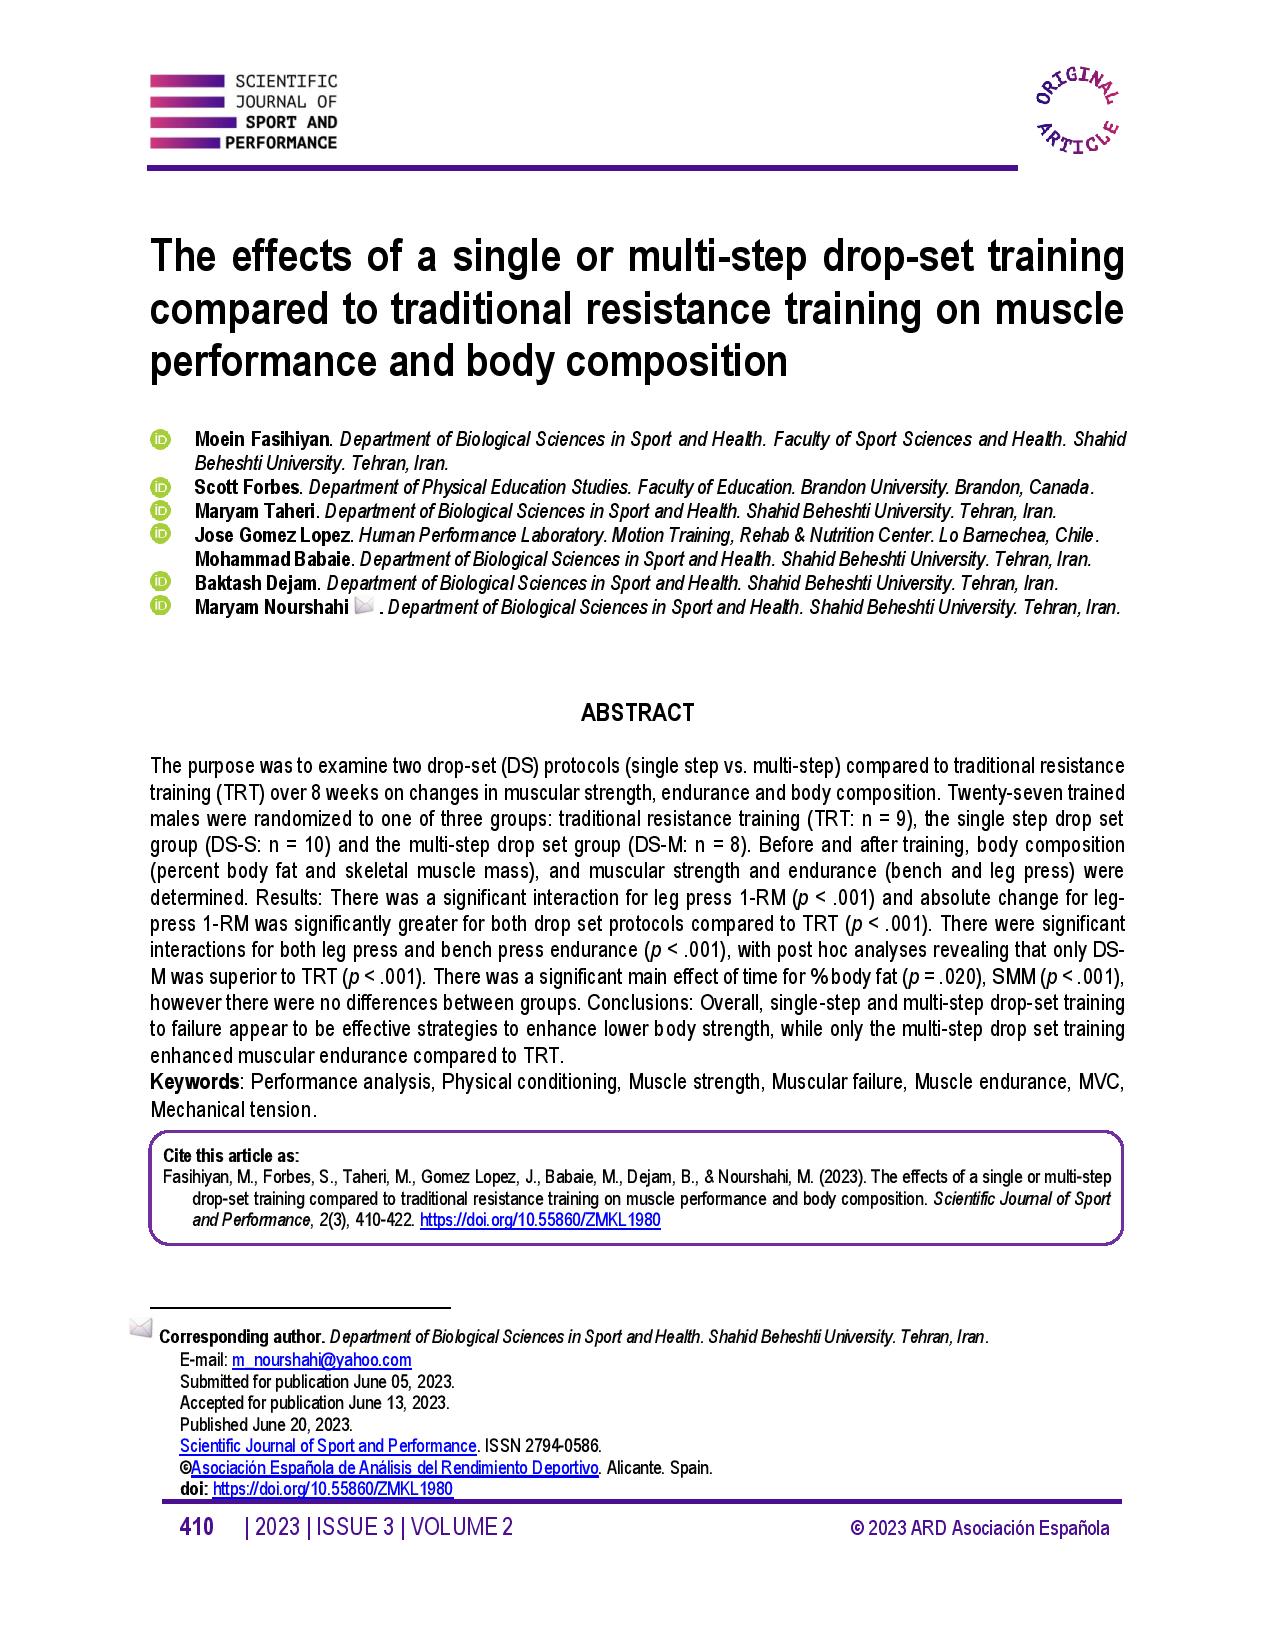 The effects of a single or multi-step drop-set training compared to traditional resistance training on muscle performance and body composition